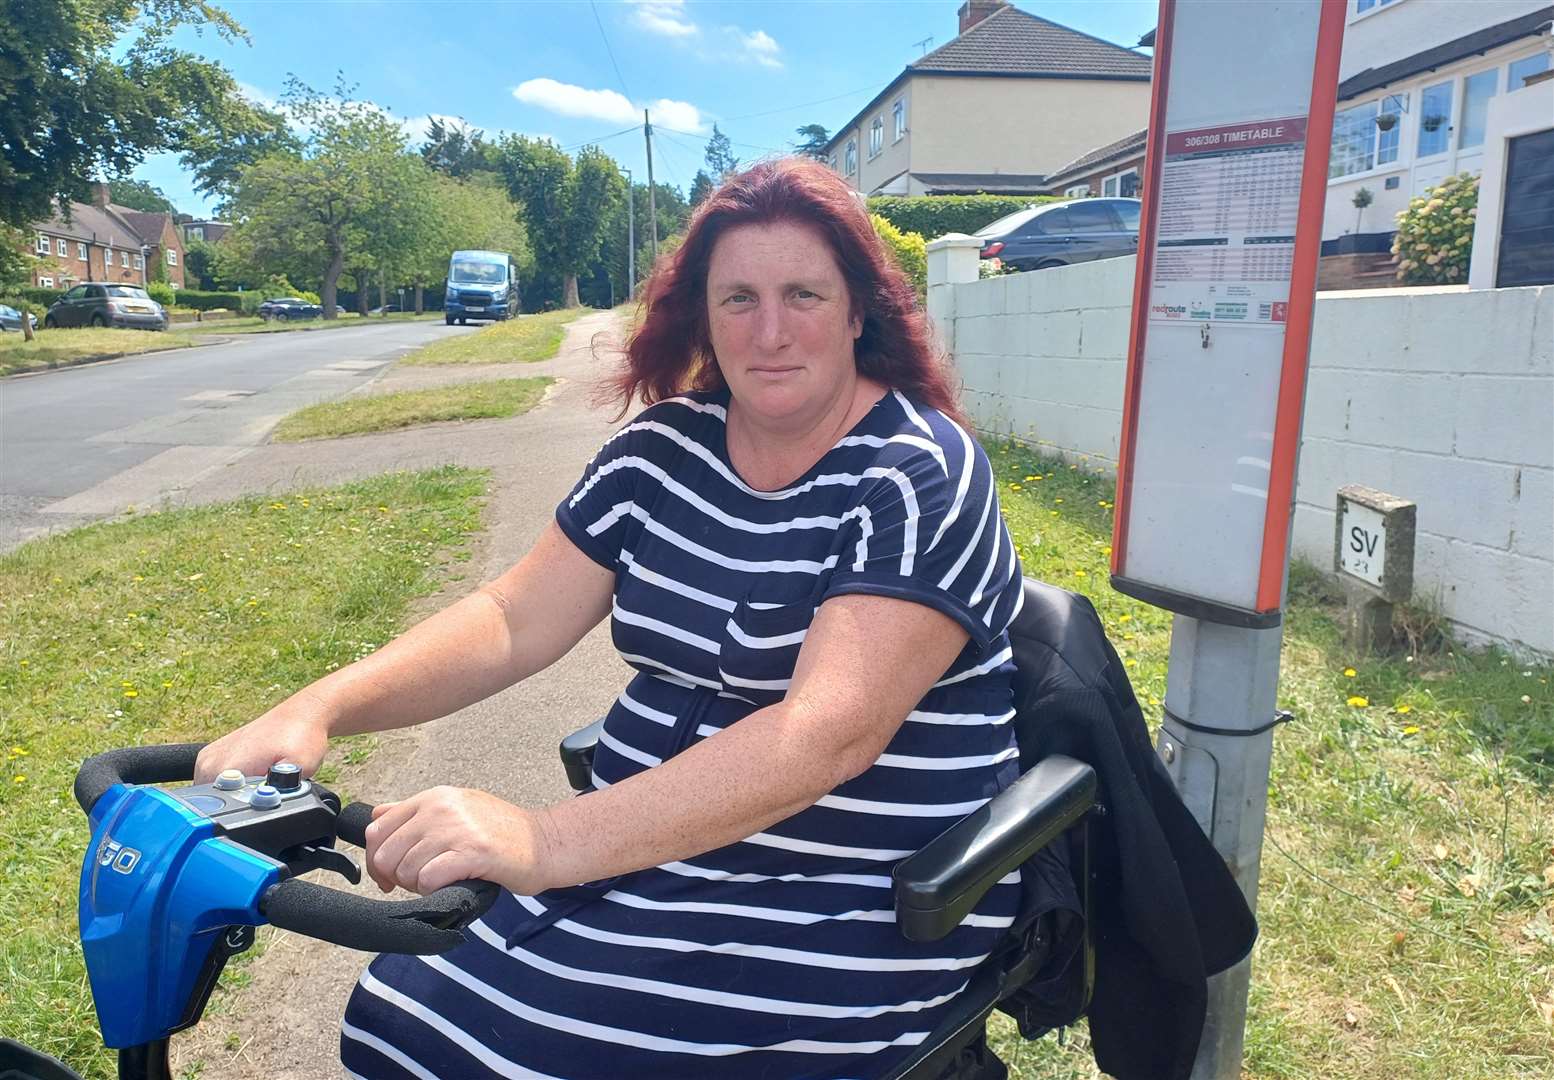 Amanda King from Sevenoaks says she was refused entry on a Go Coach bus while on her mobility scooter